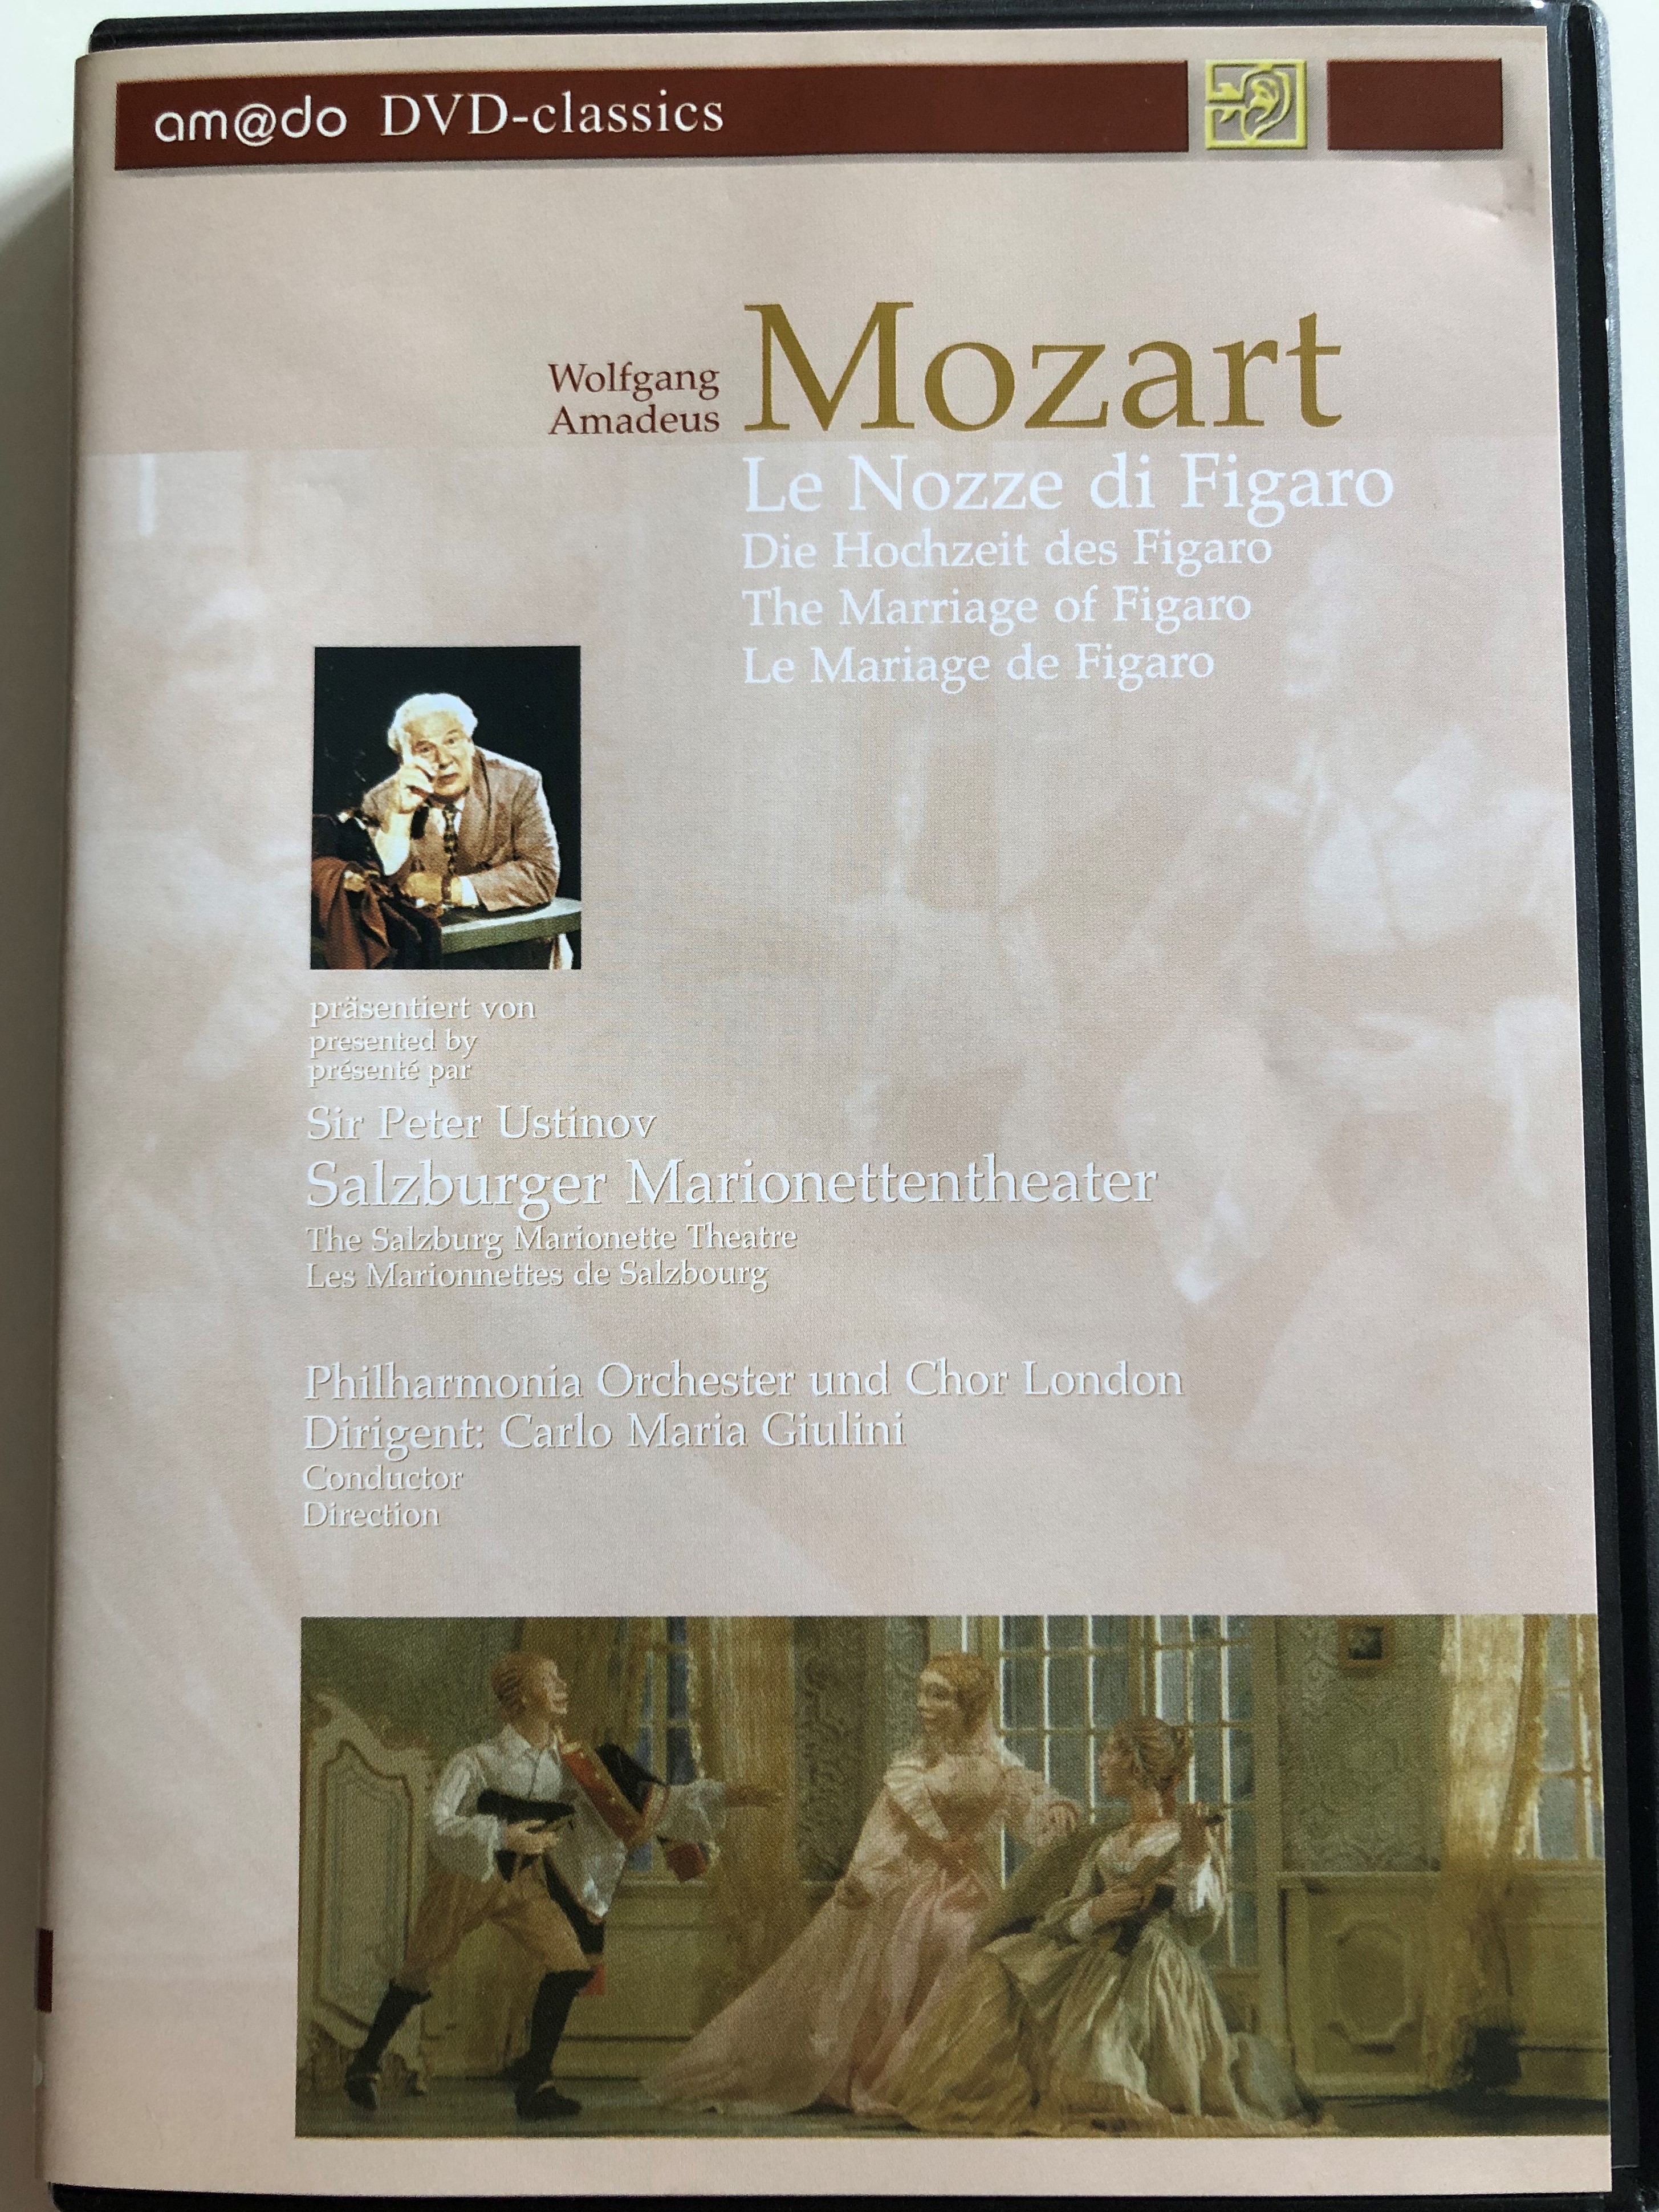 w.a.-mozart-le-nozze-di-figaro-dvd-2002-the-marriage-of-figaro-directed-by-georg-w-bbolt-text-and-narration-by-sir-peter-ustinov-the-salzburg-marionette-theatre-london-philharmonic-orchestra-and-choir-conducted-by-c-1-.jpg